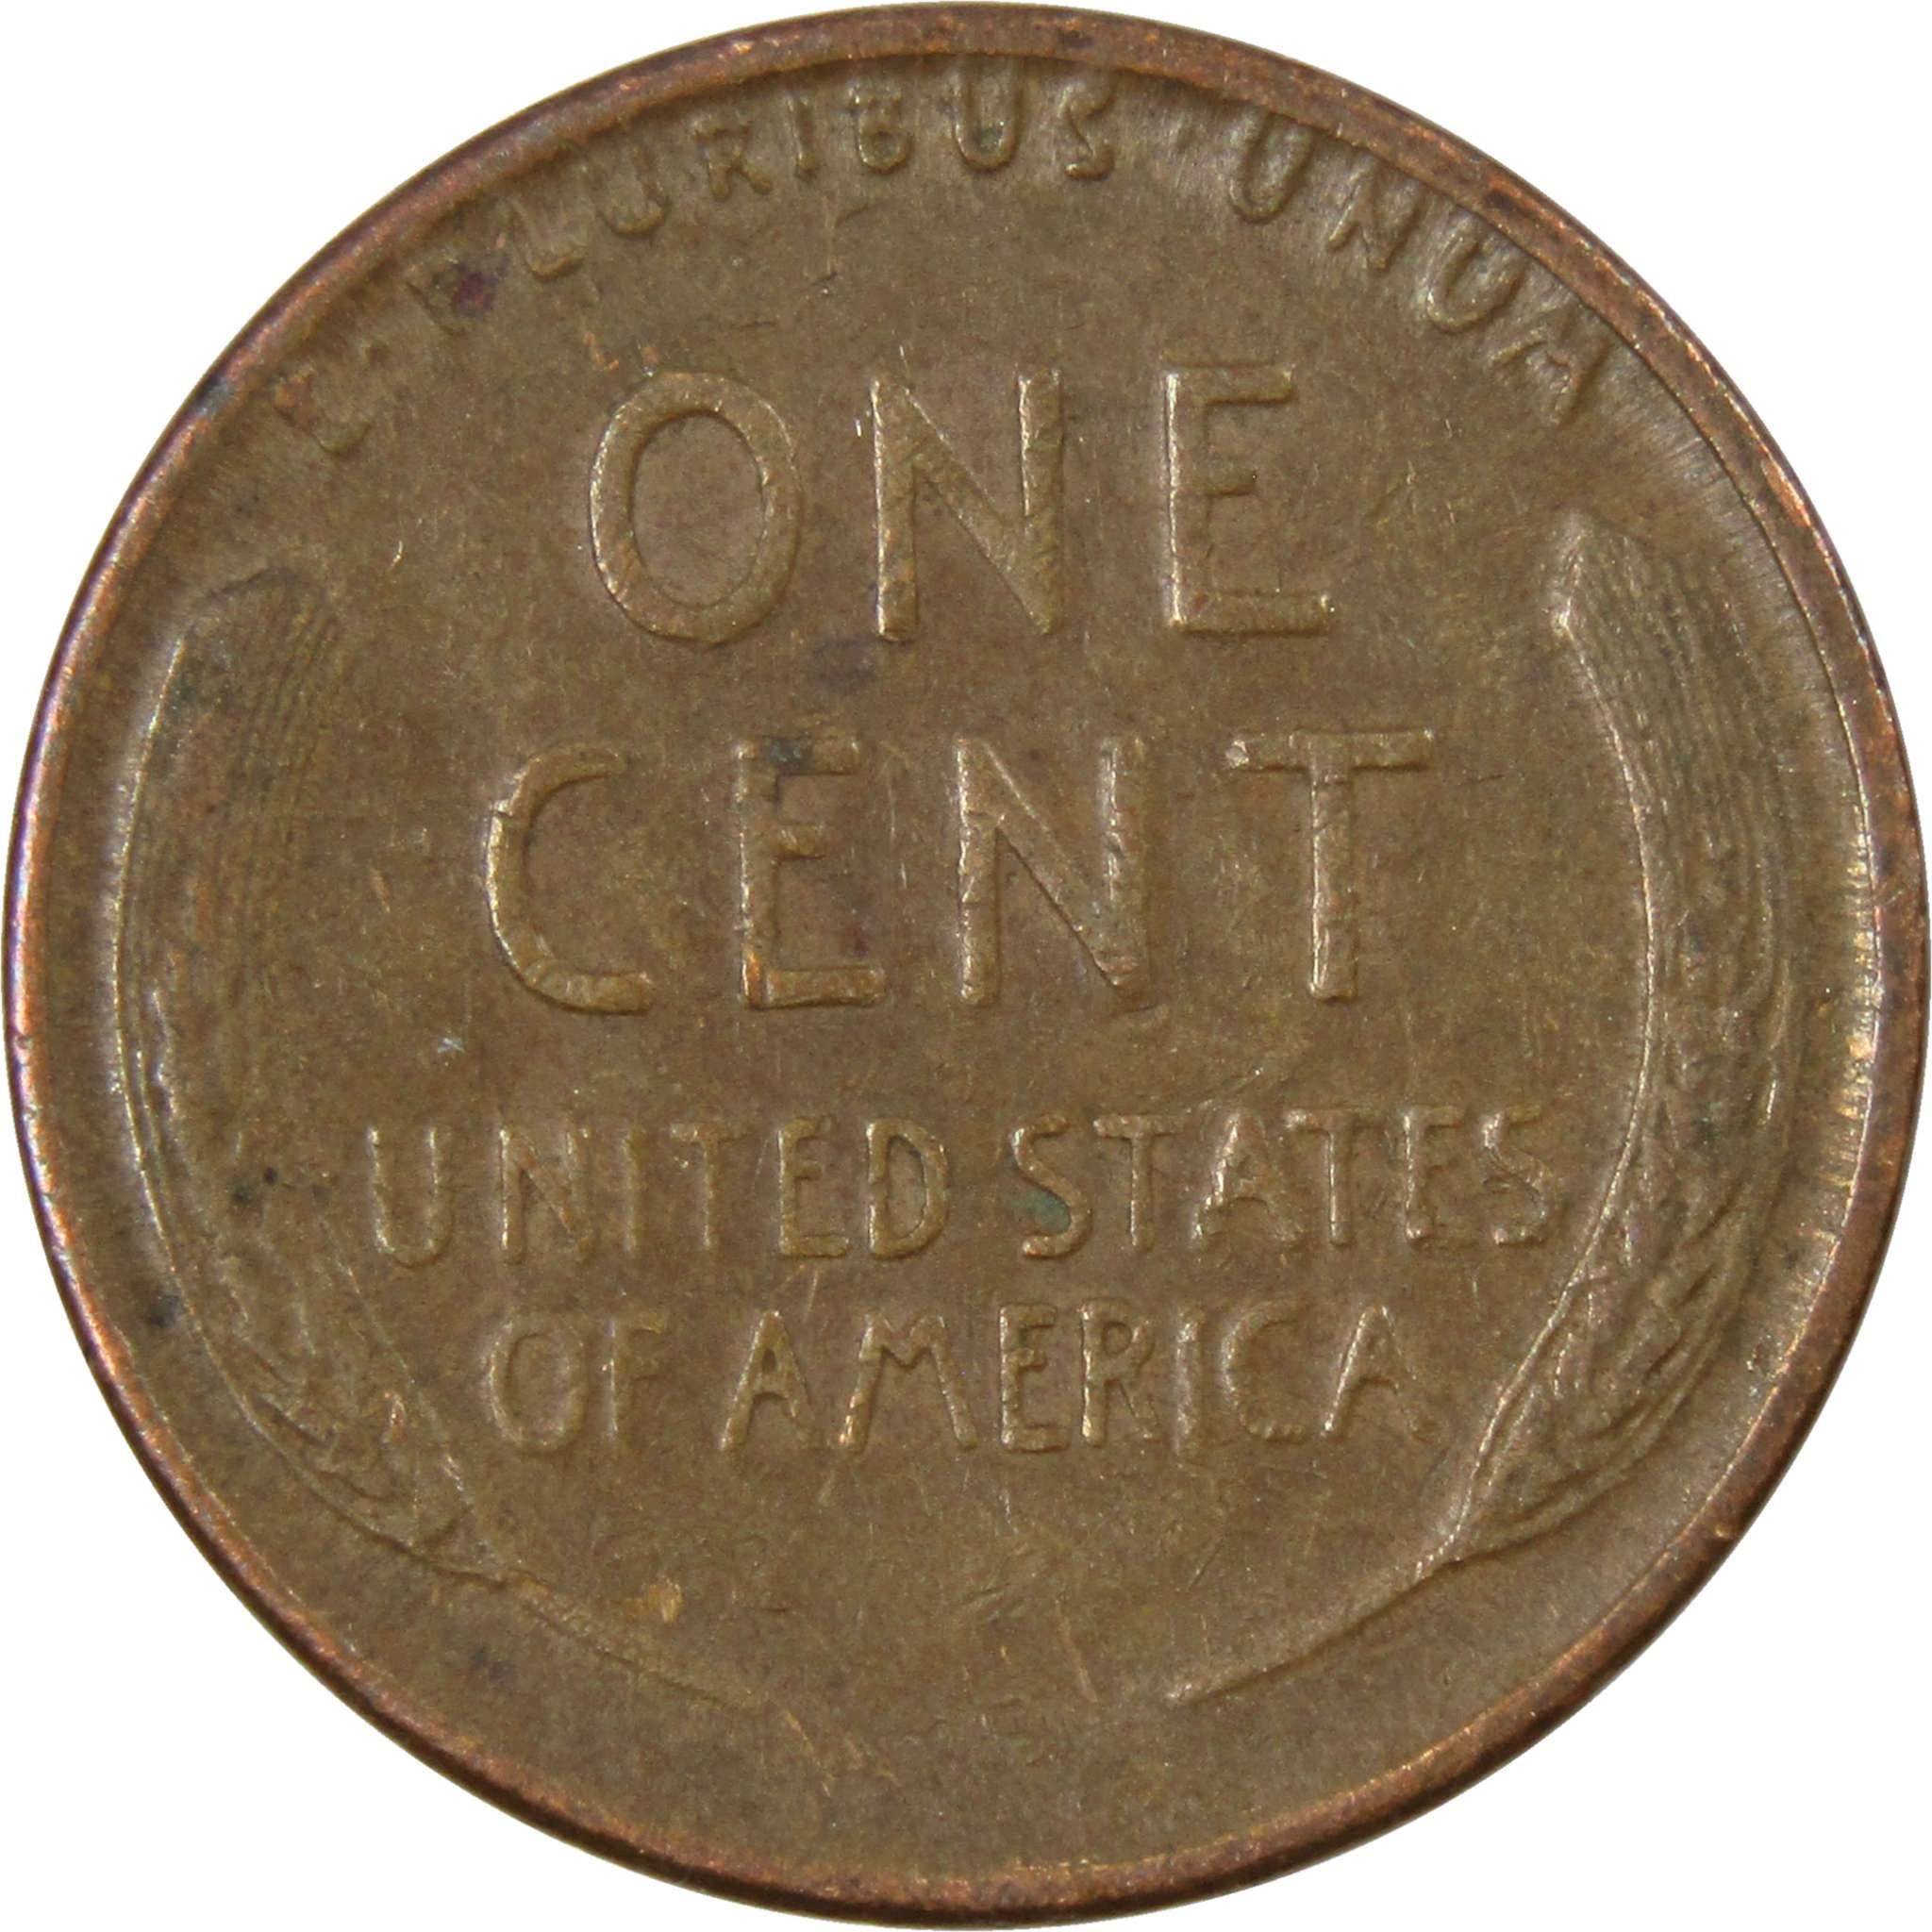 1944 D Lincoln Wheat Cent AG About Good Bronze Penny 1c Coin Collectible